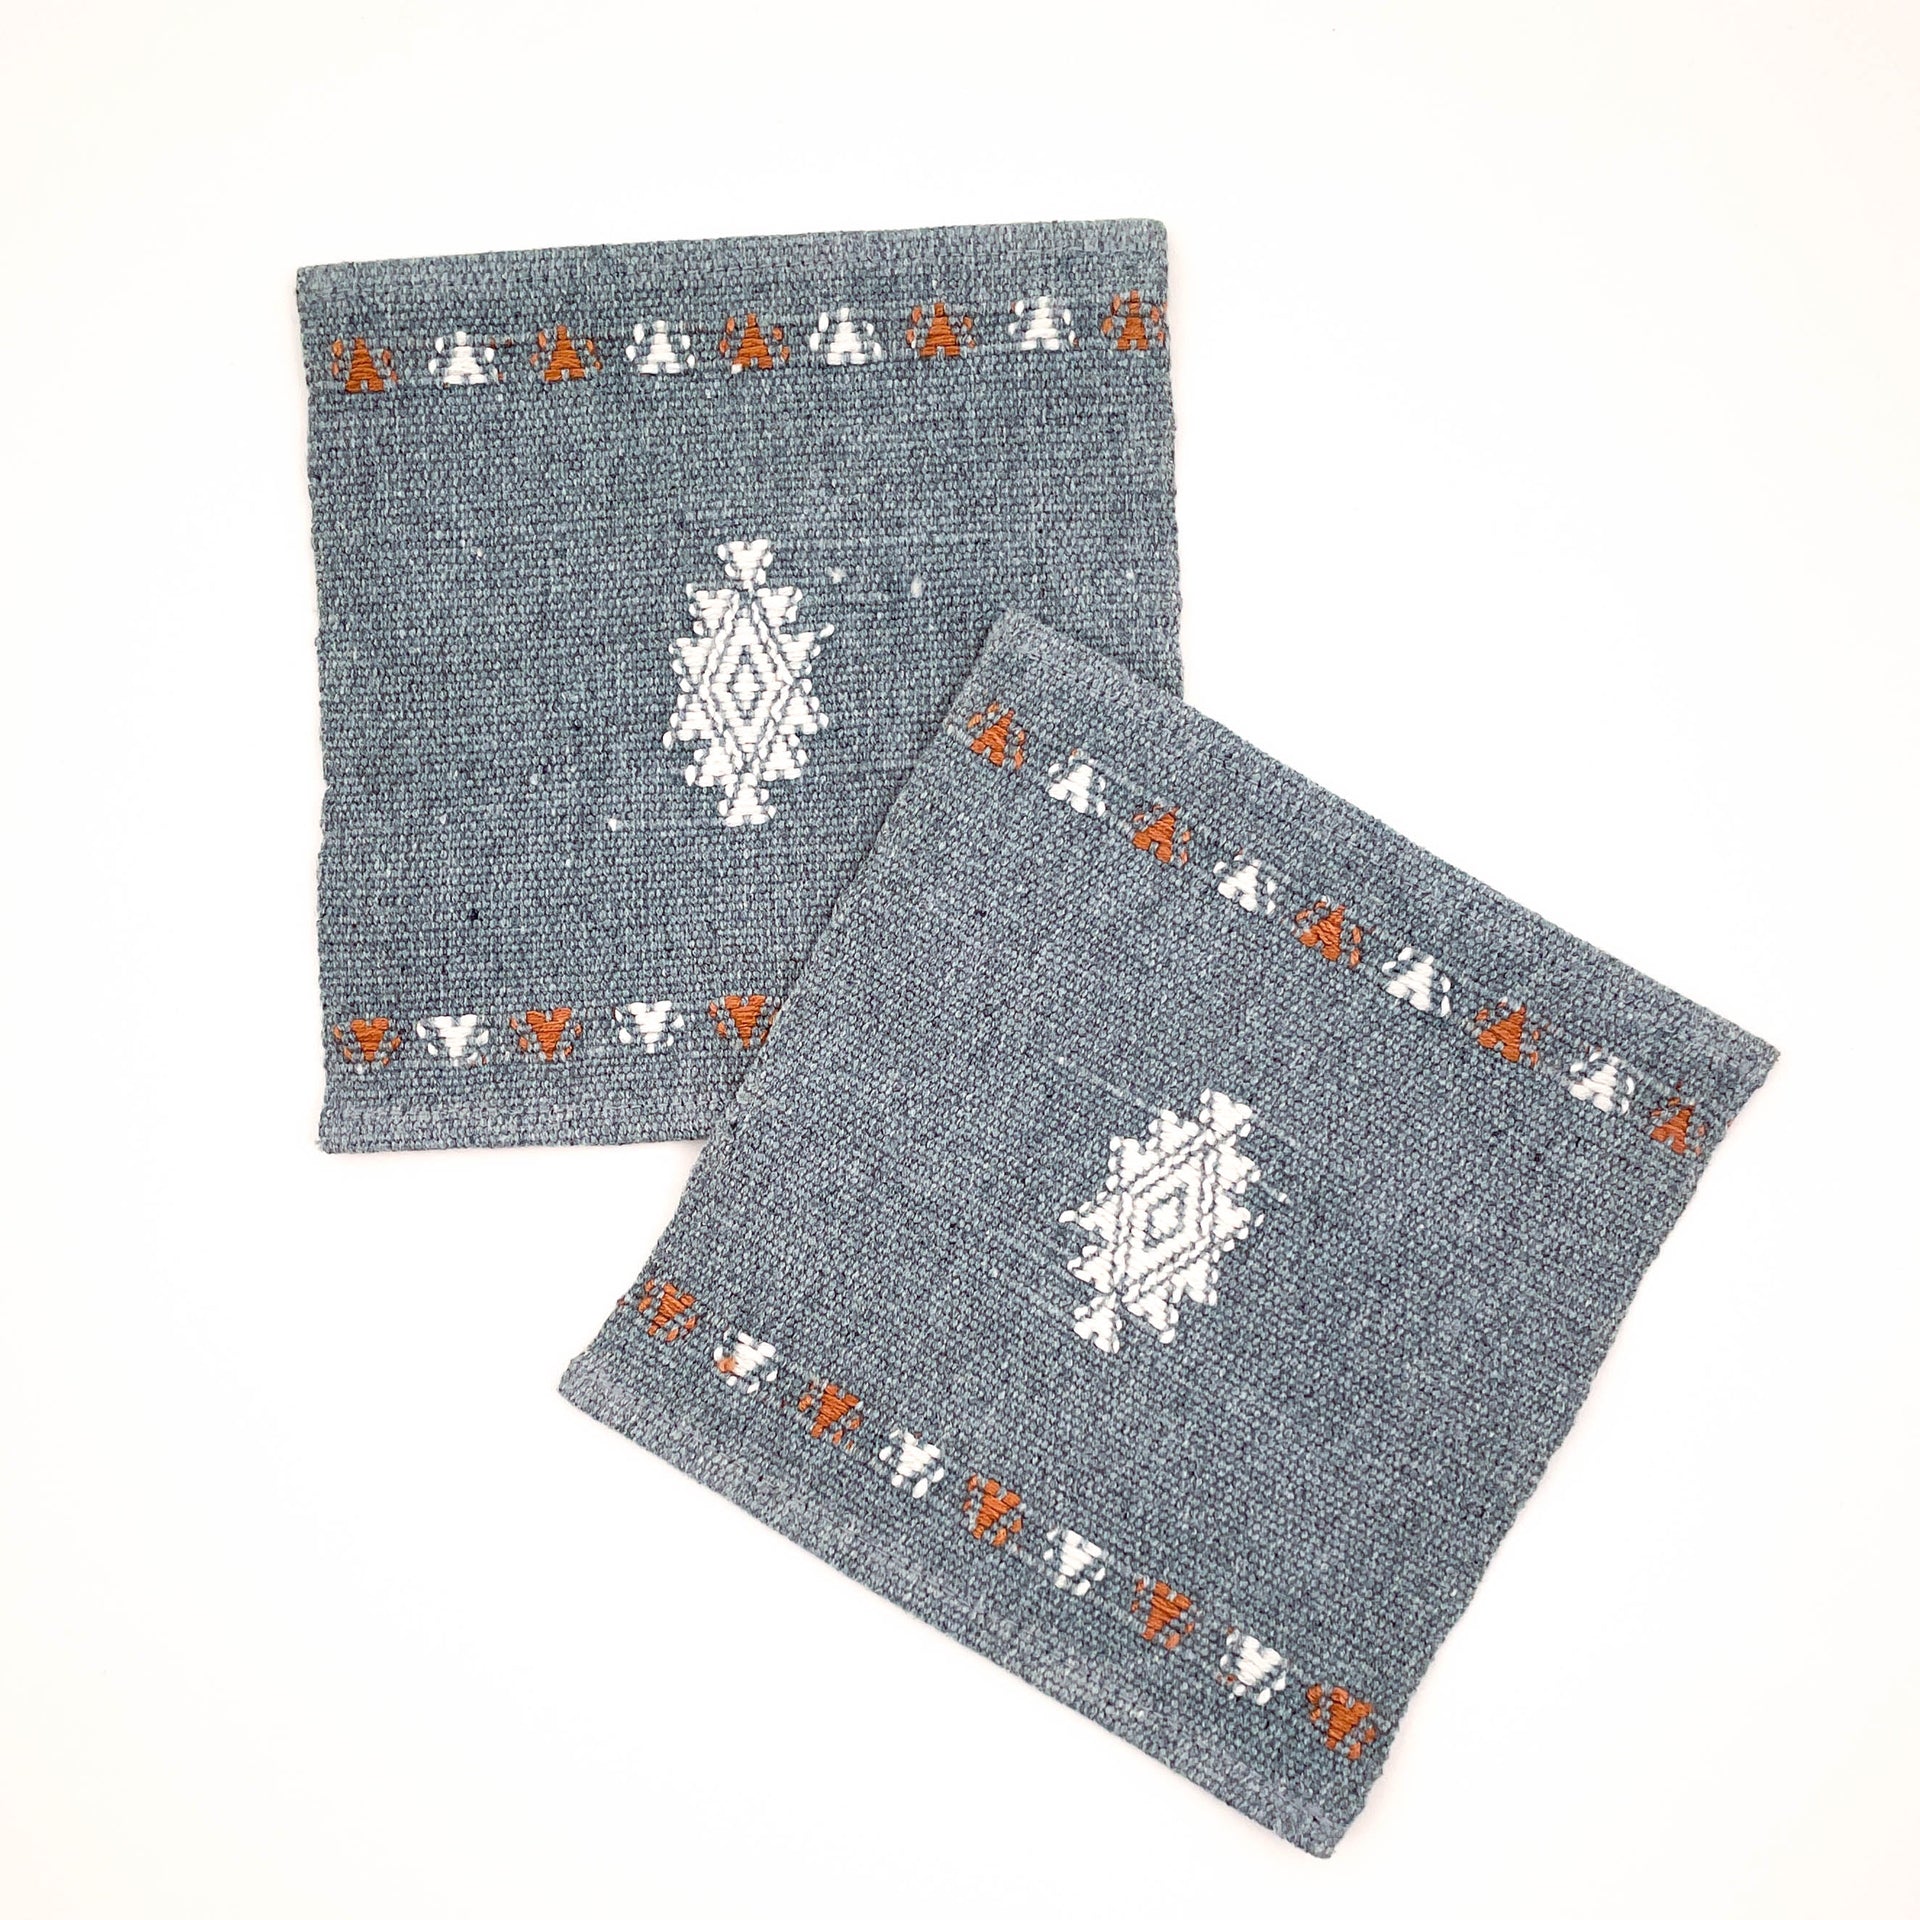 Set of two Mayan Hands coasters handwoven on a traditional backstrap loom by skilled Maya women artisans in San Rafael in Guatemala.